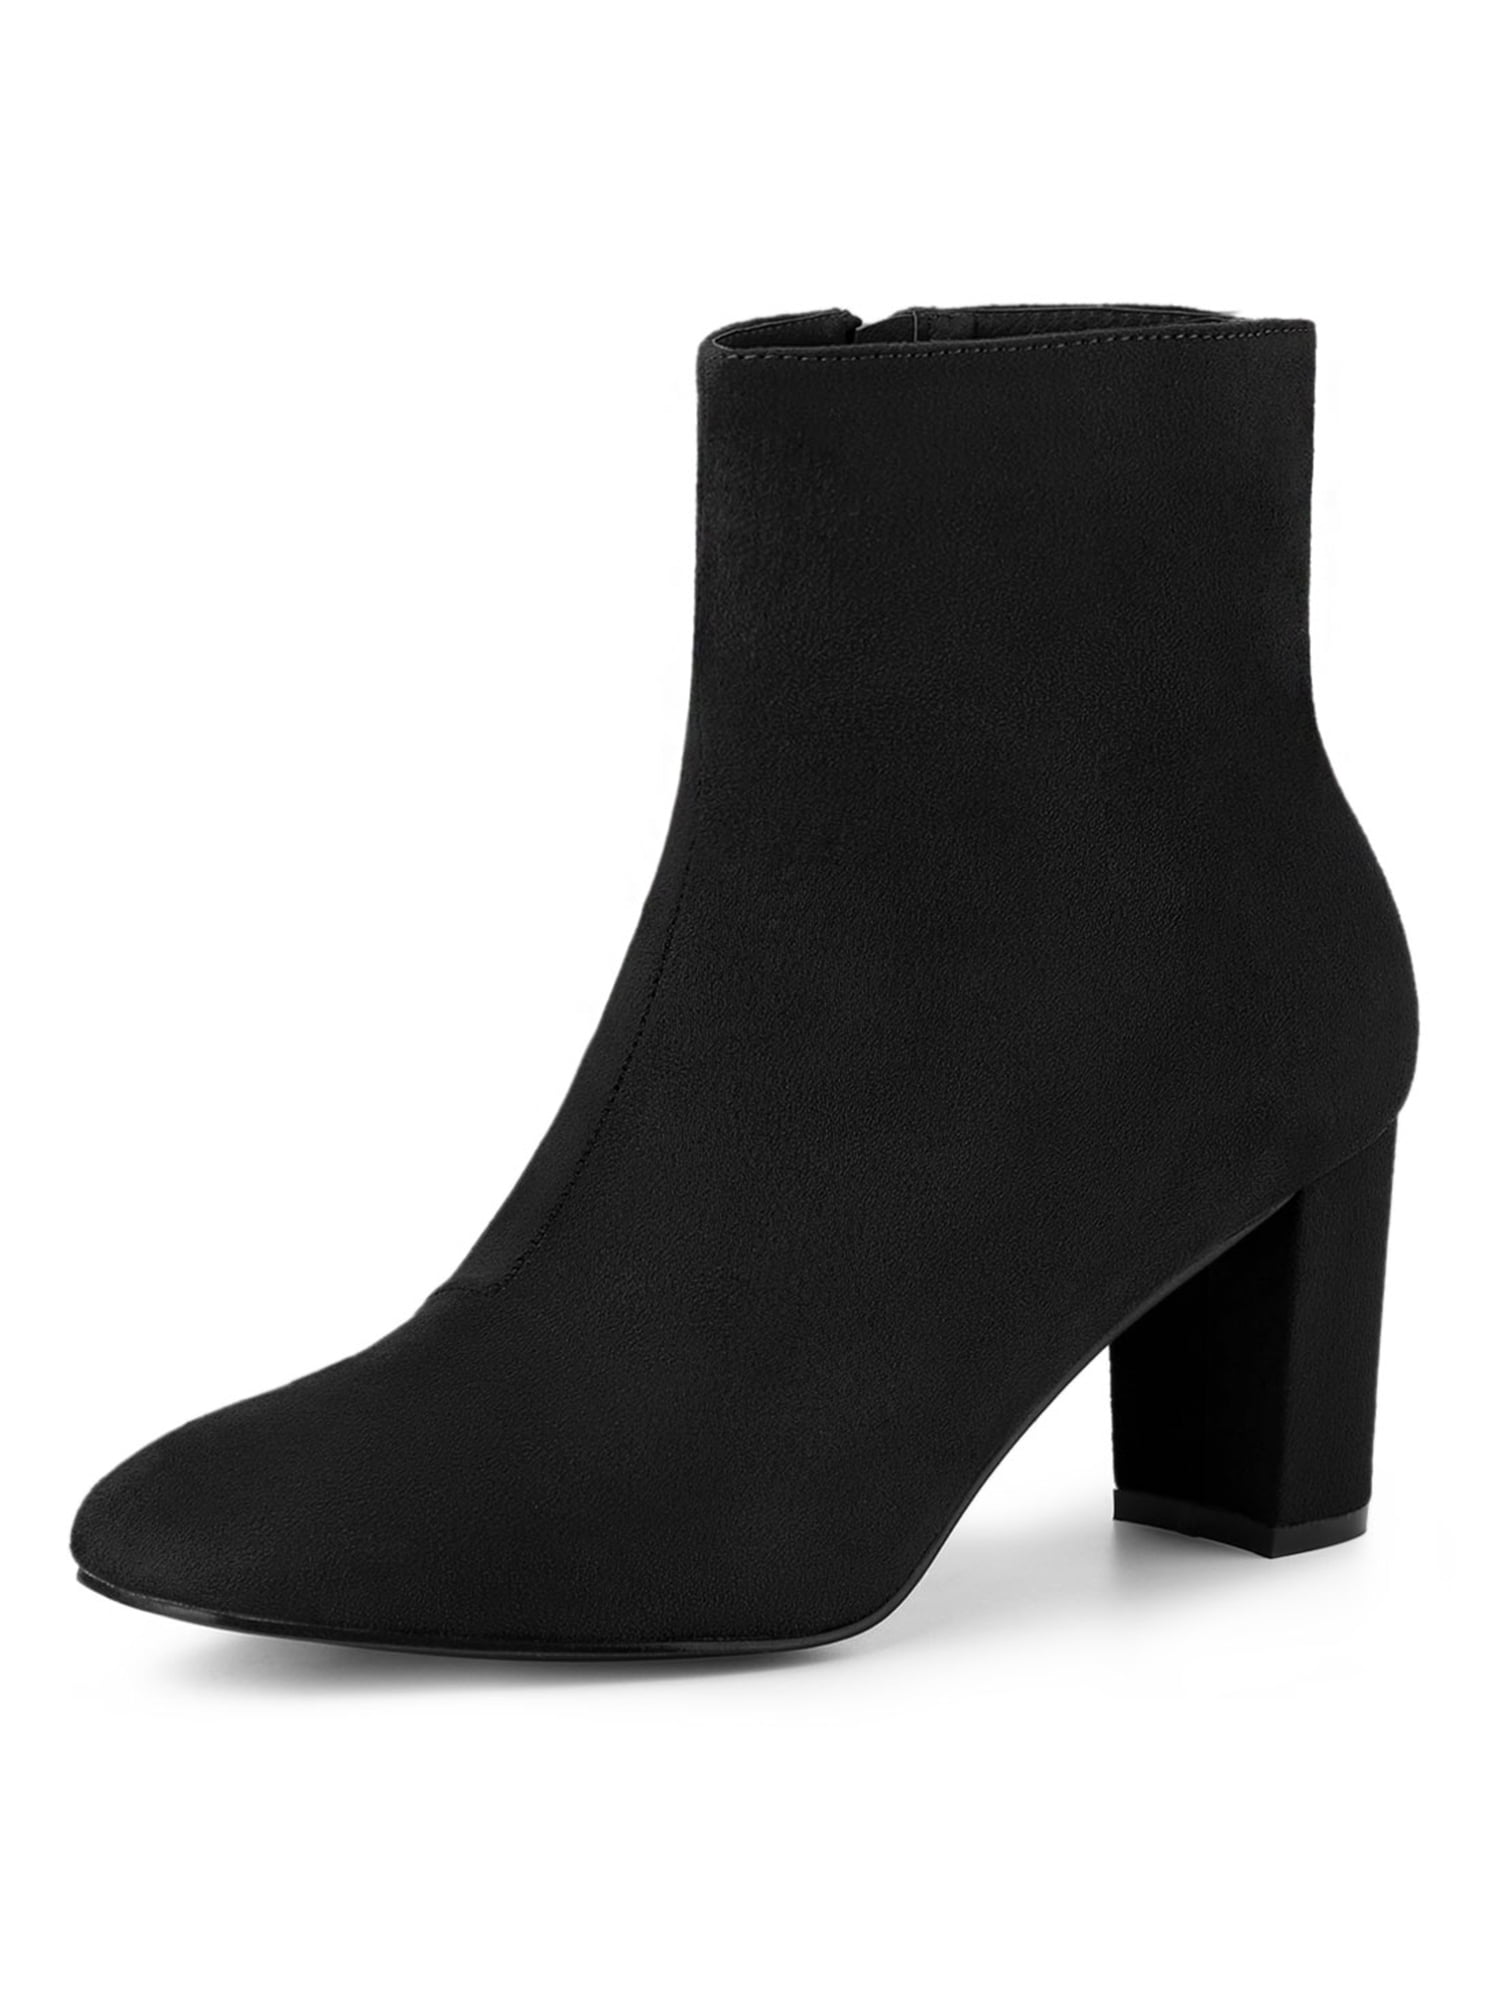 Super explosion Womens Soft Stretchy Chunky Heel Slip On Side Zipper Bootie Bow Ankle Boots 